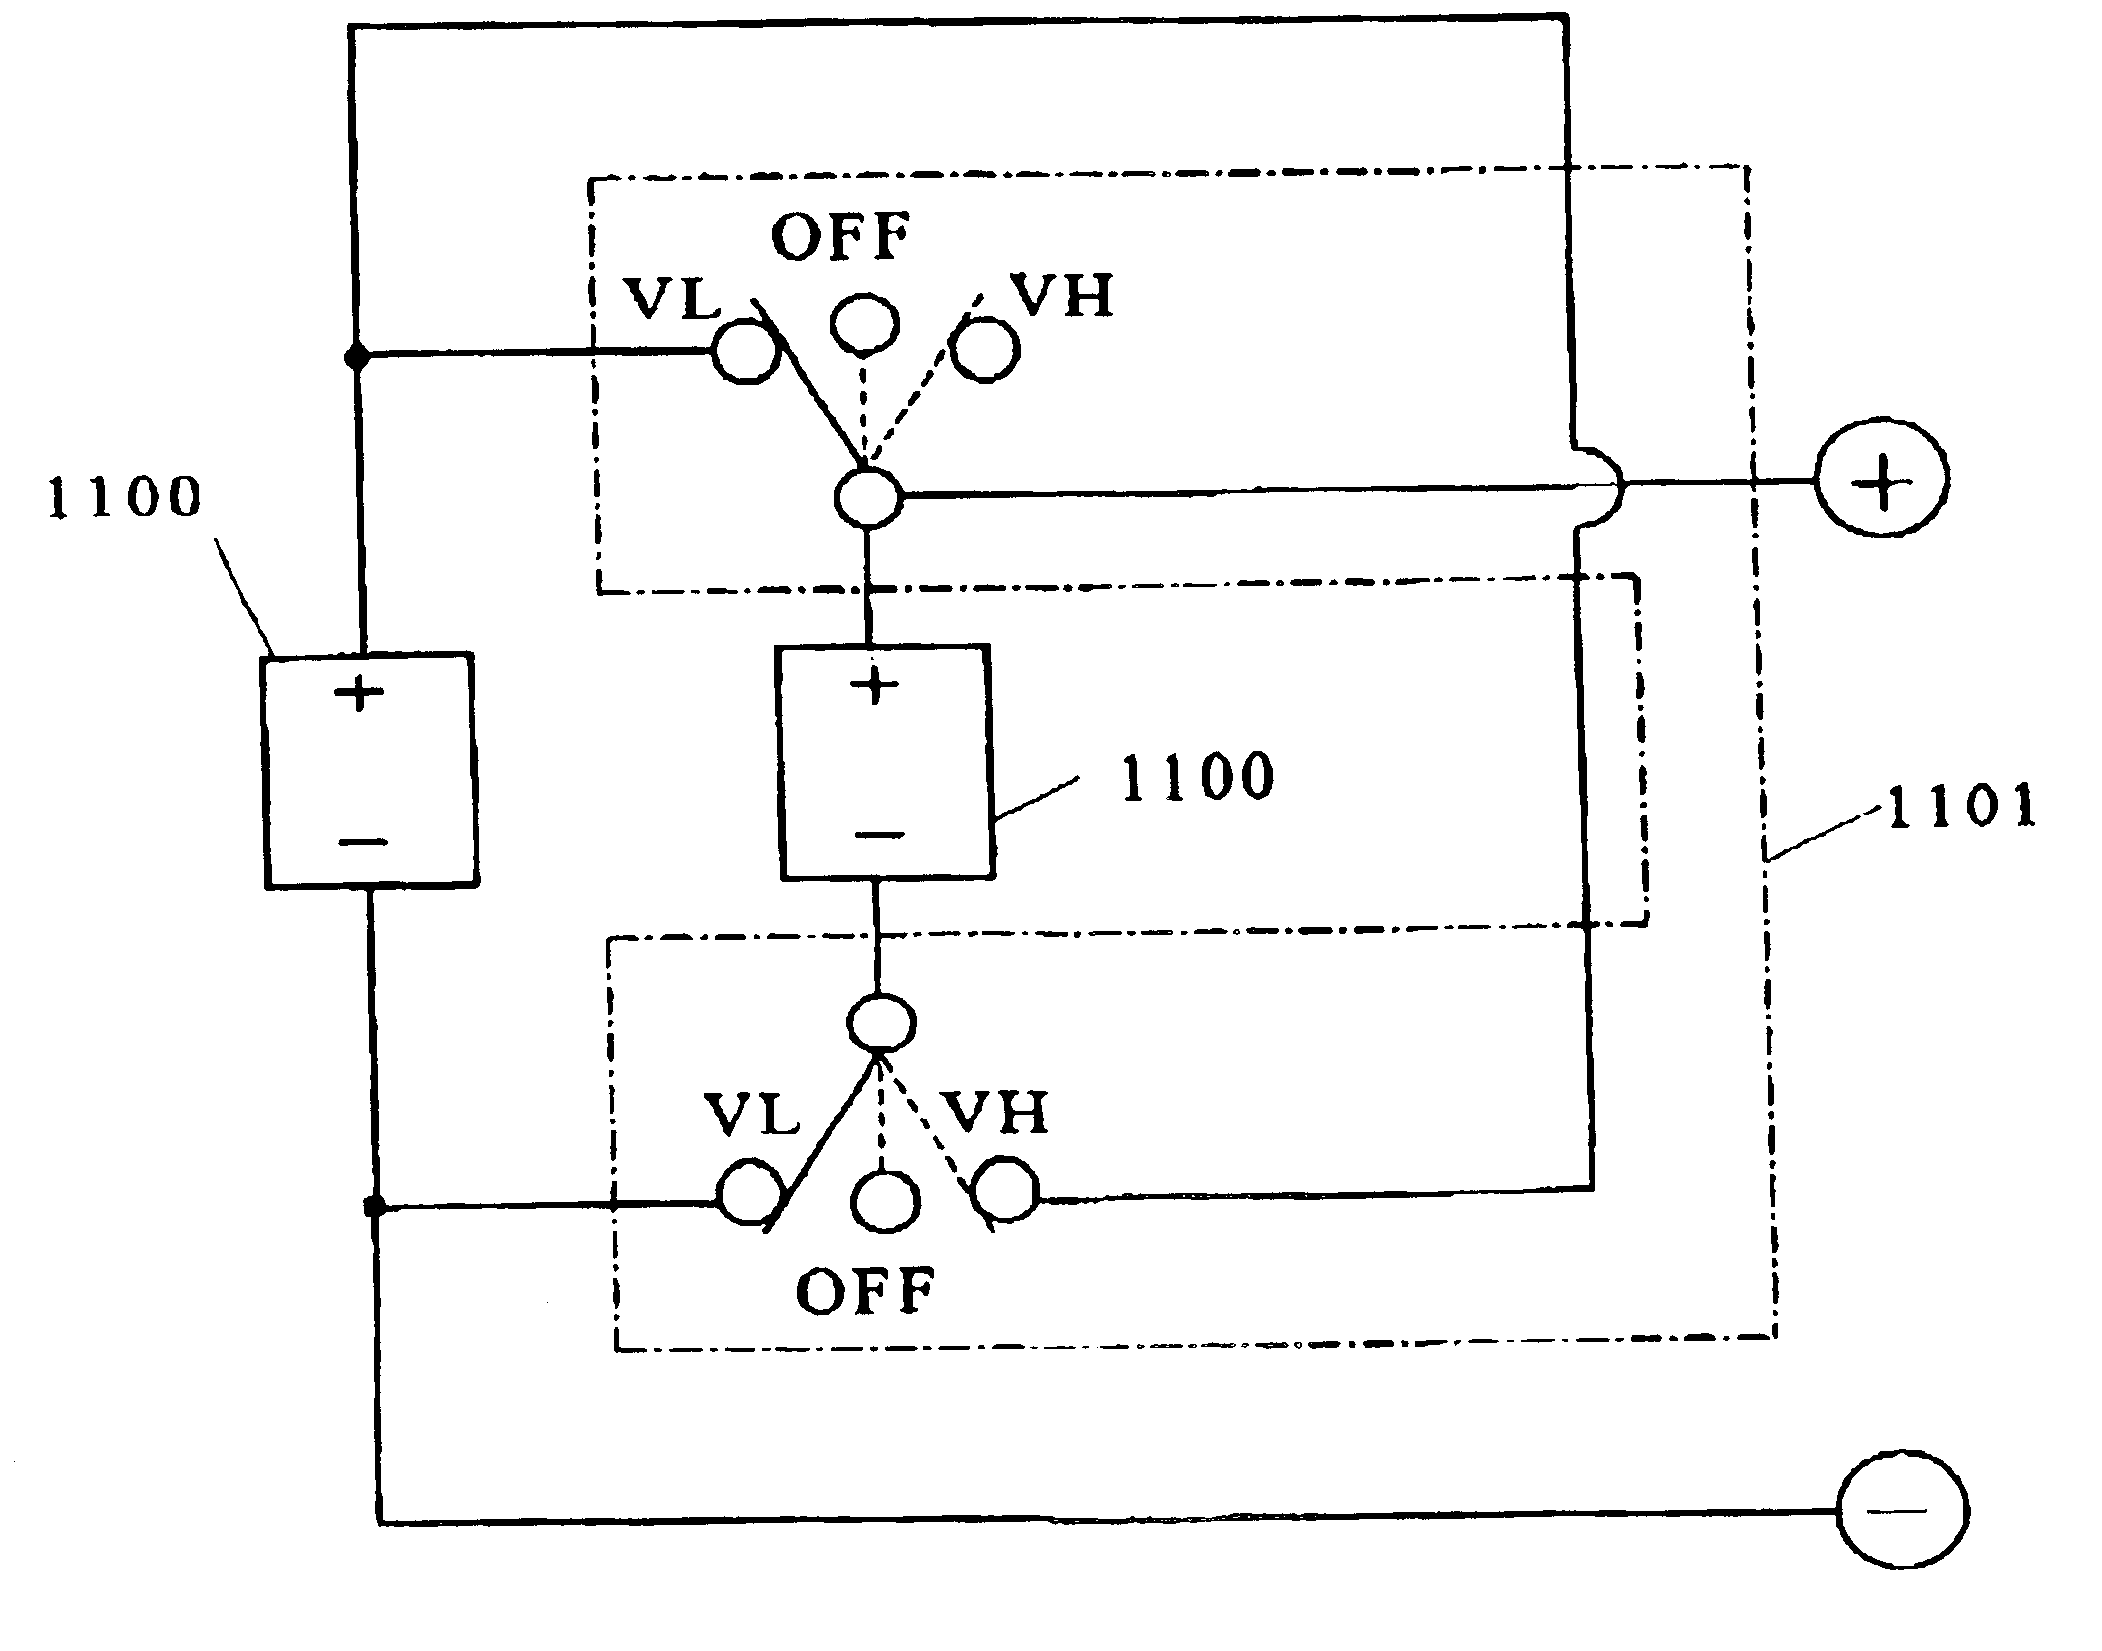 Wireless information device with its transmission power level adjustable